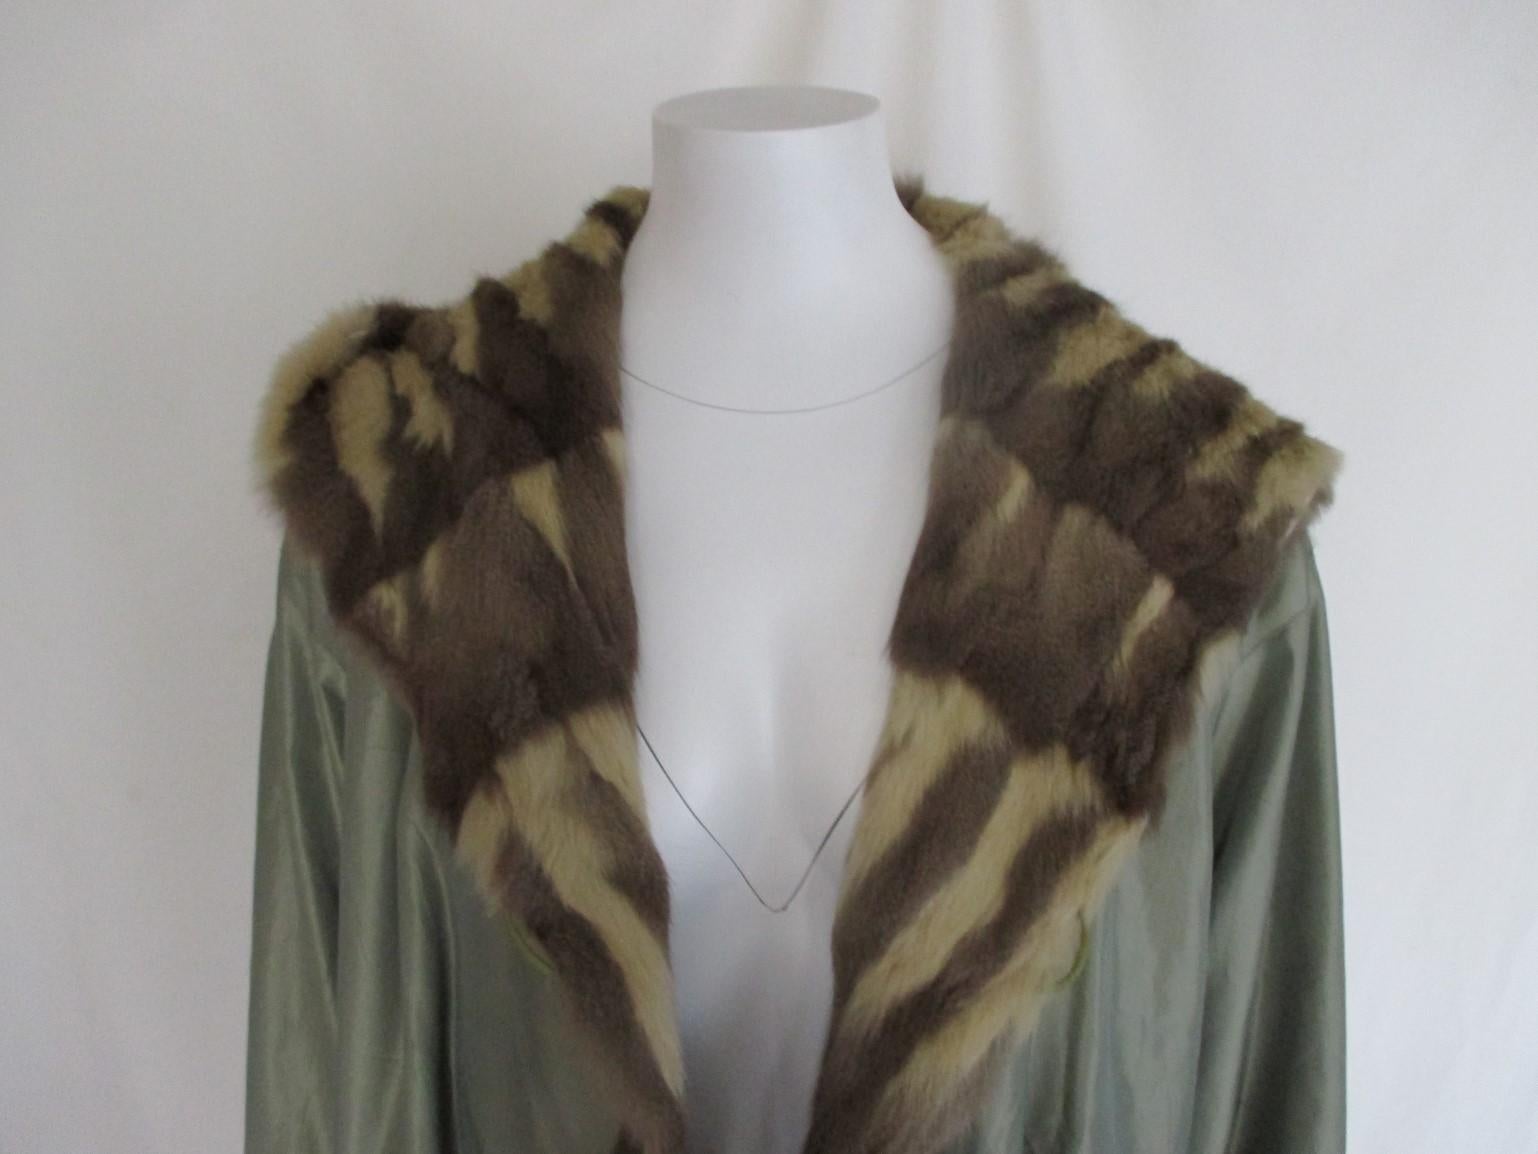 This vintage coat with hood can be worn at both sides, it has 2 buttons and 2 pockets at the fur side and at the other side 2 pockets and 2 buttons.
Sleeves can roll up and down
The colour is shiny green fabric
Very light to wear
In good pre-owned